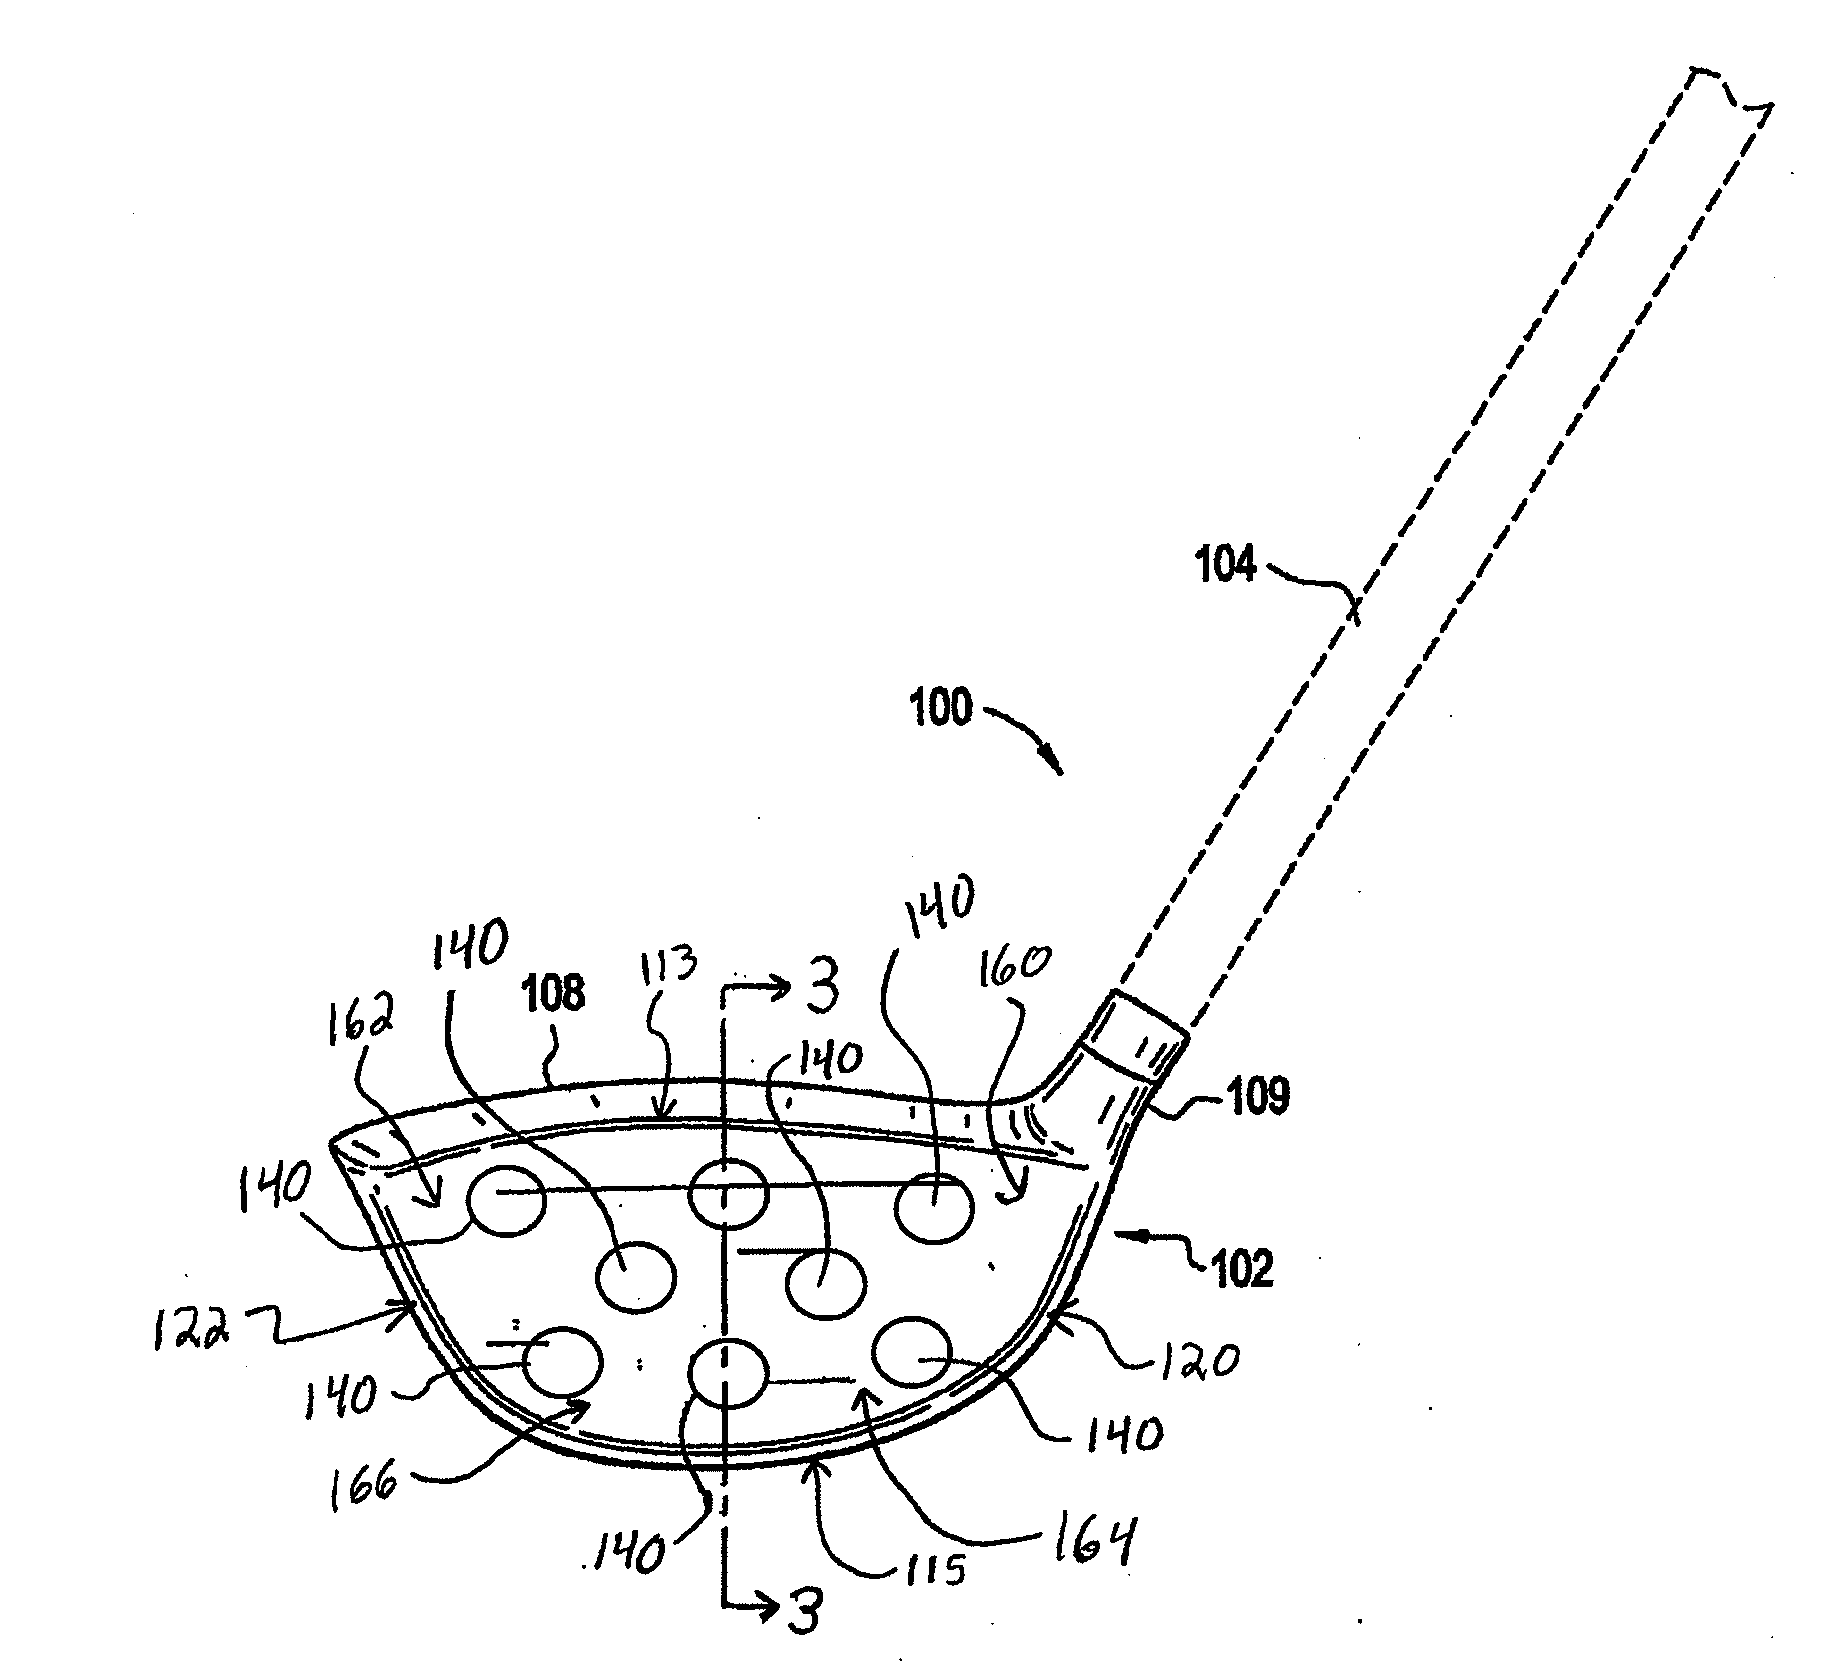 Golf club head or other ball striking device having multiple face inserts